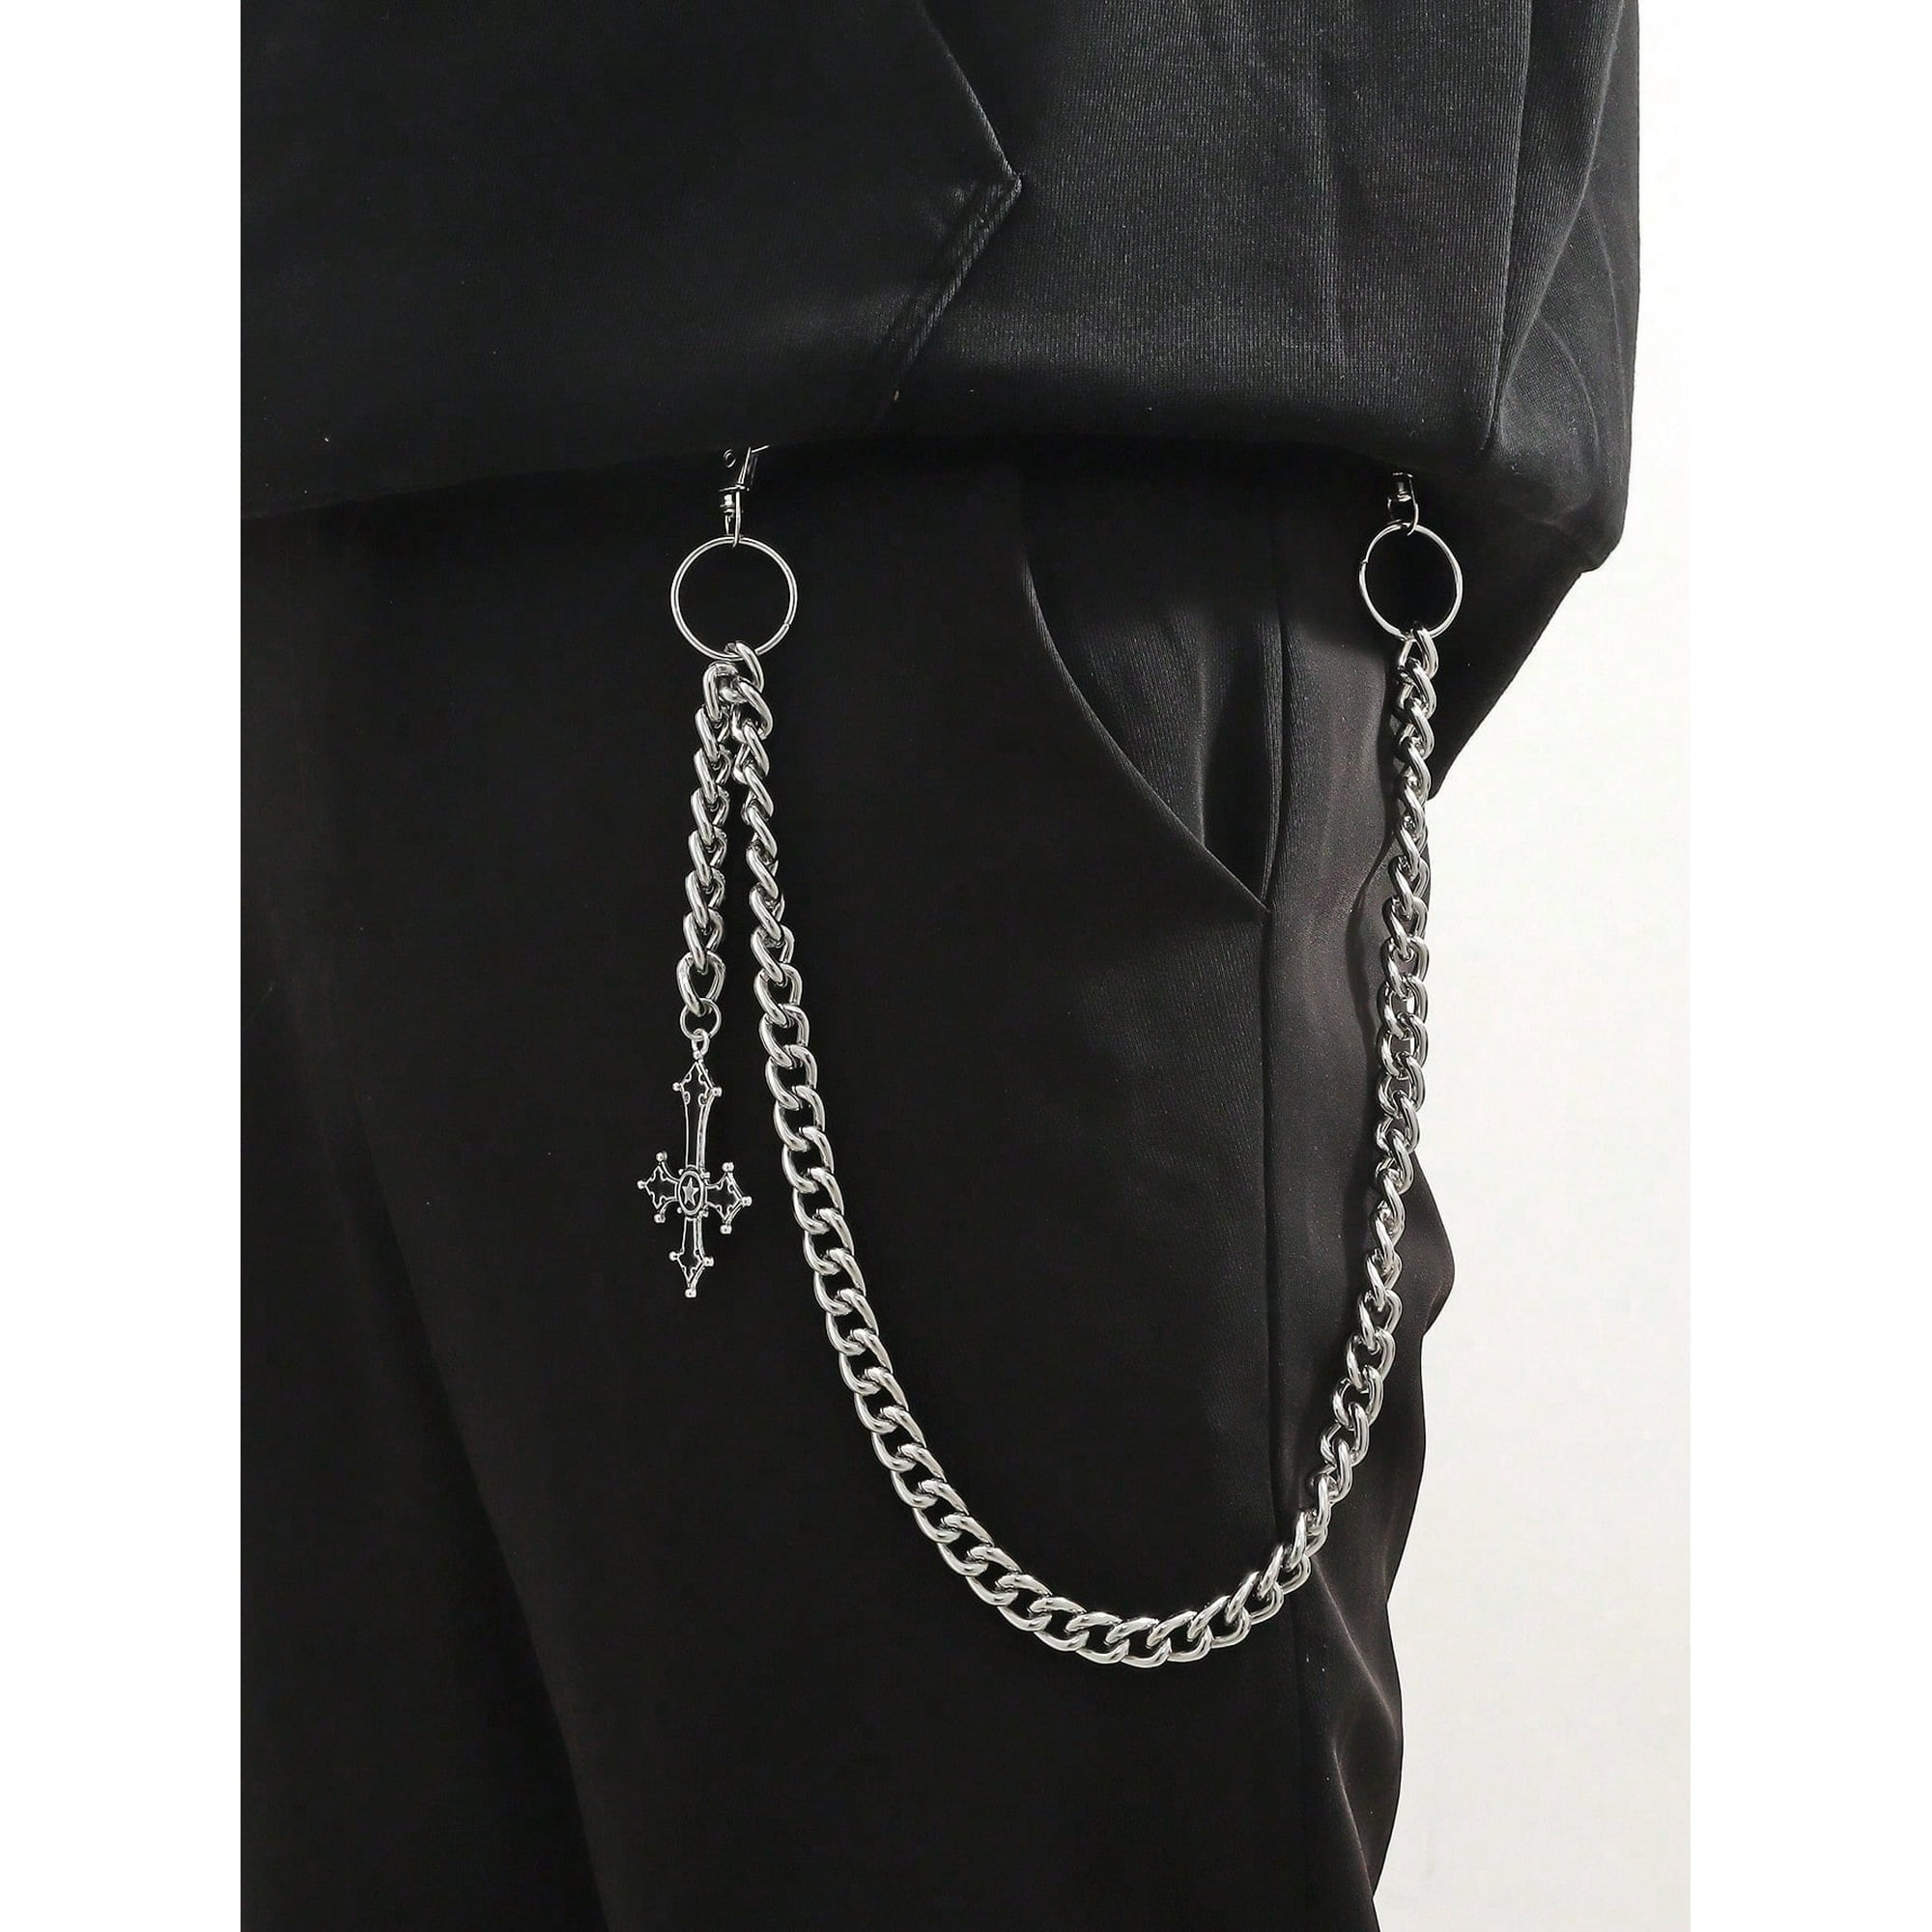 1pc men's single thick silver chain with double loop cross pendant to match suit &amp; pants